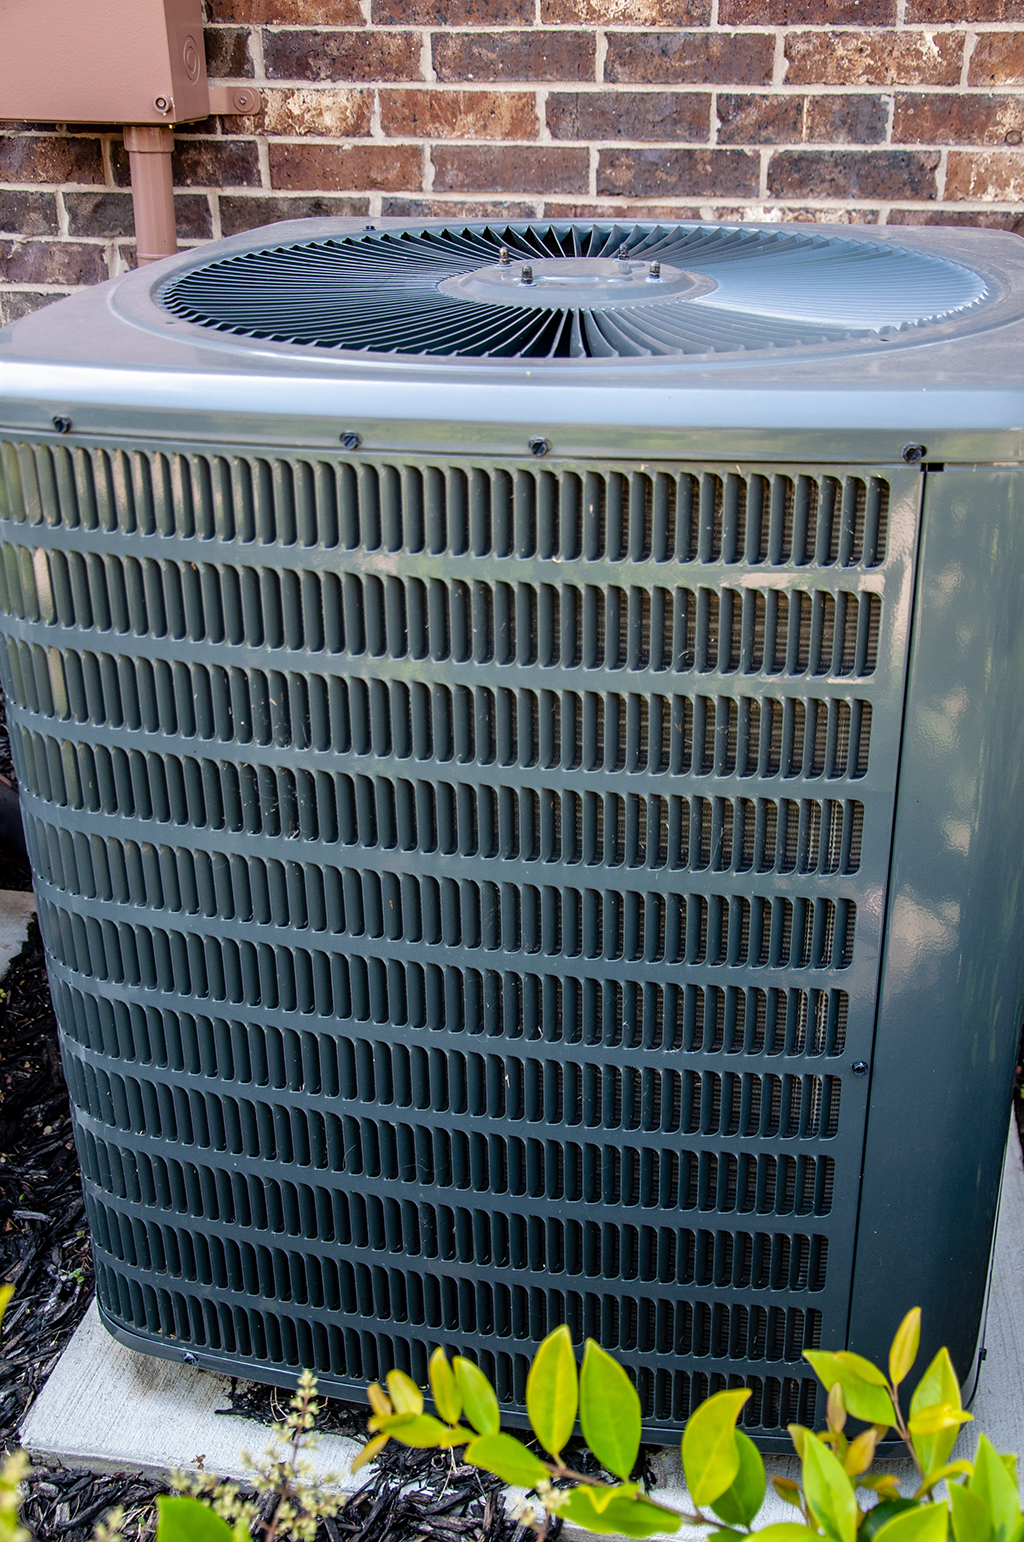 Ways to Prolong the Life of Your Air Conditioner | Air Conditioning Service in Garland, TX